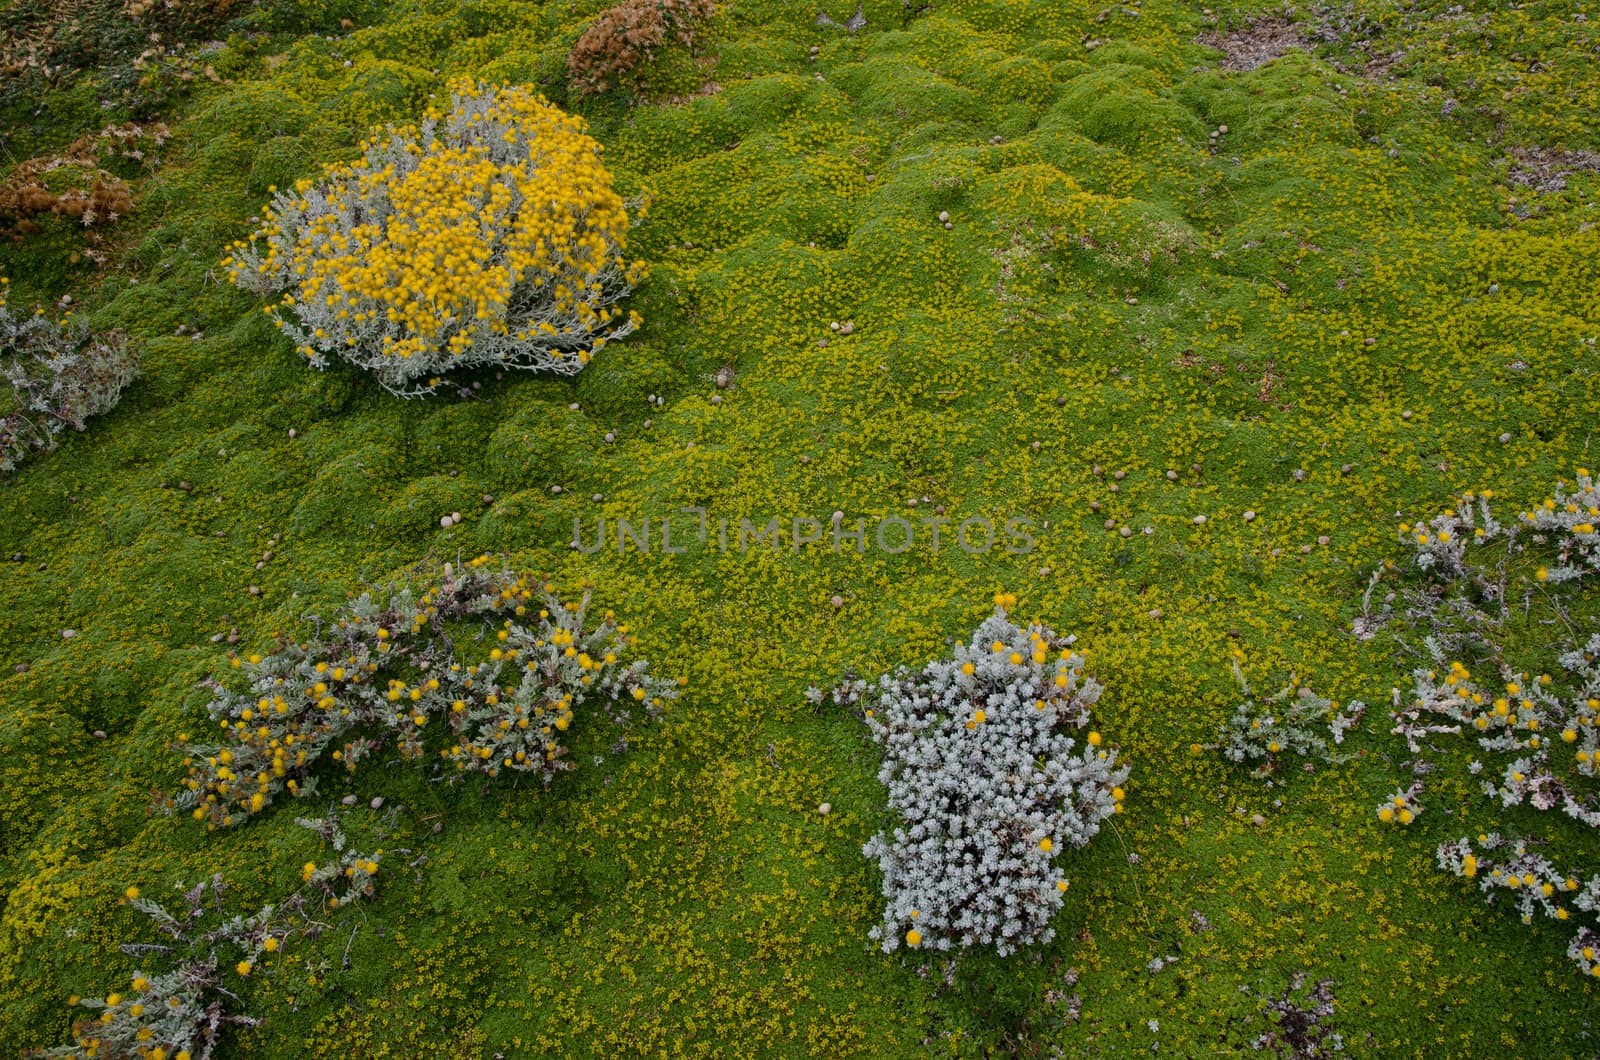 Plants of Senecio sp. and ground covered by vegetation. by VictorSuarez